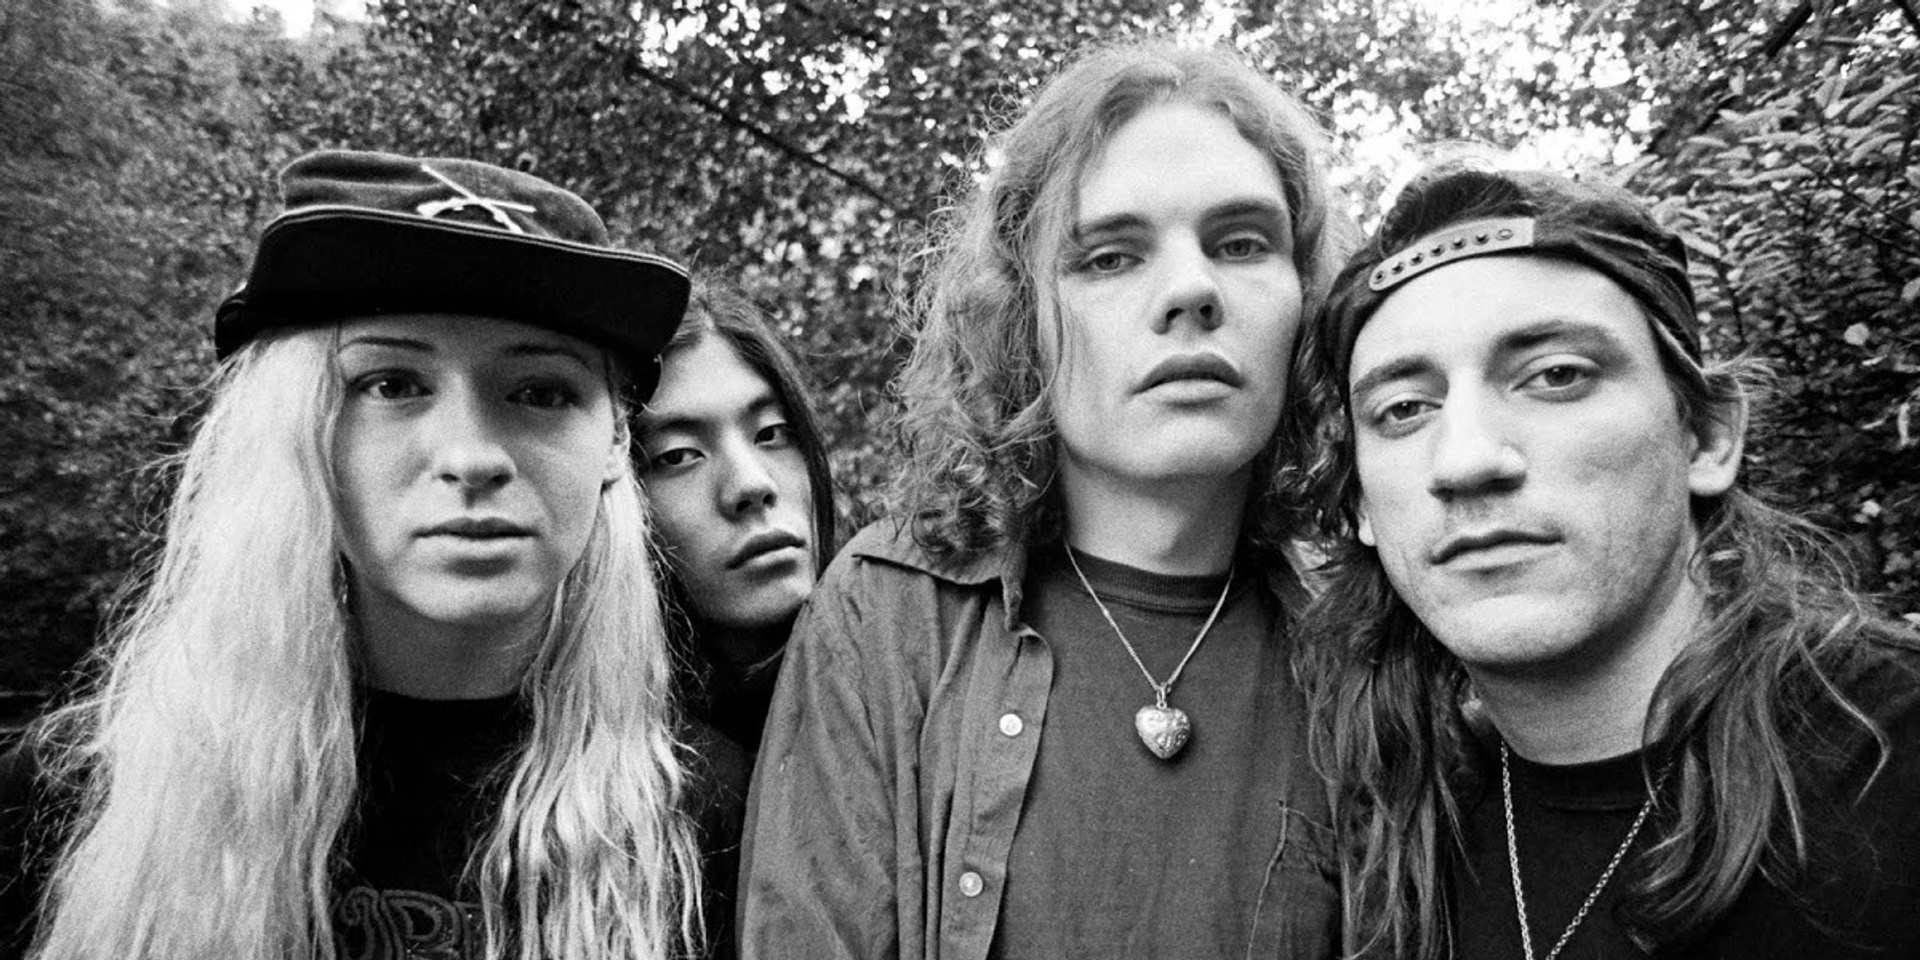 The Smashing Pumpkins are reuniting, but without original bassist D’arcy Wretzky